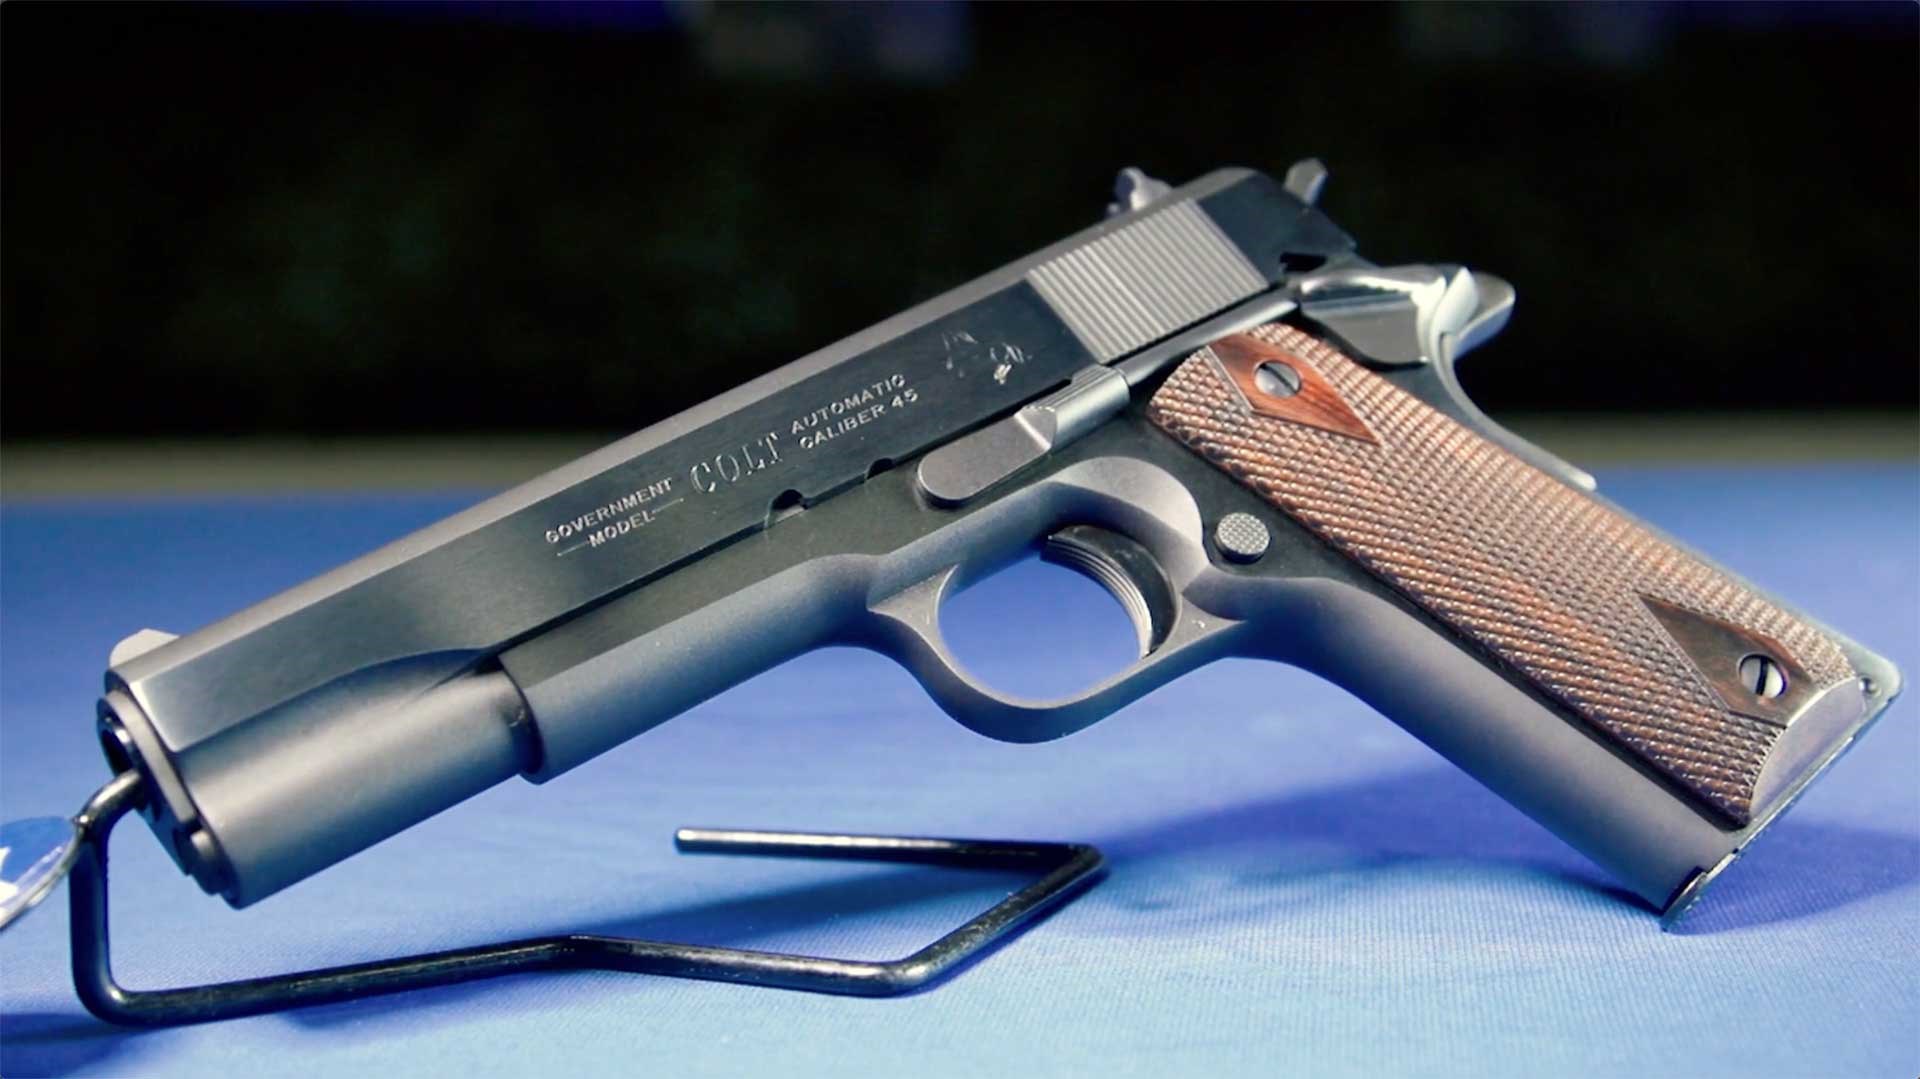 Left side of a Colt 1911 Classic shown on a blue tabletop.